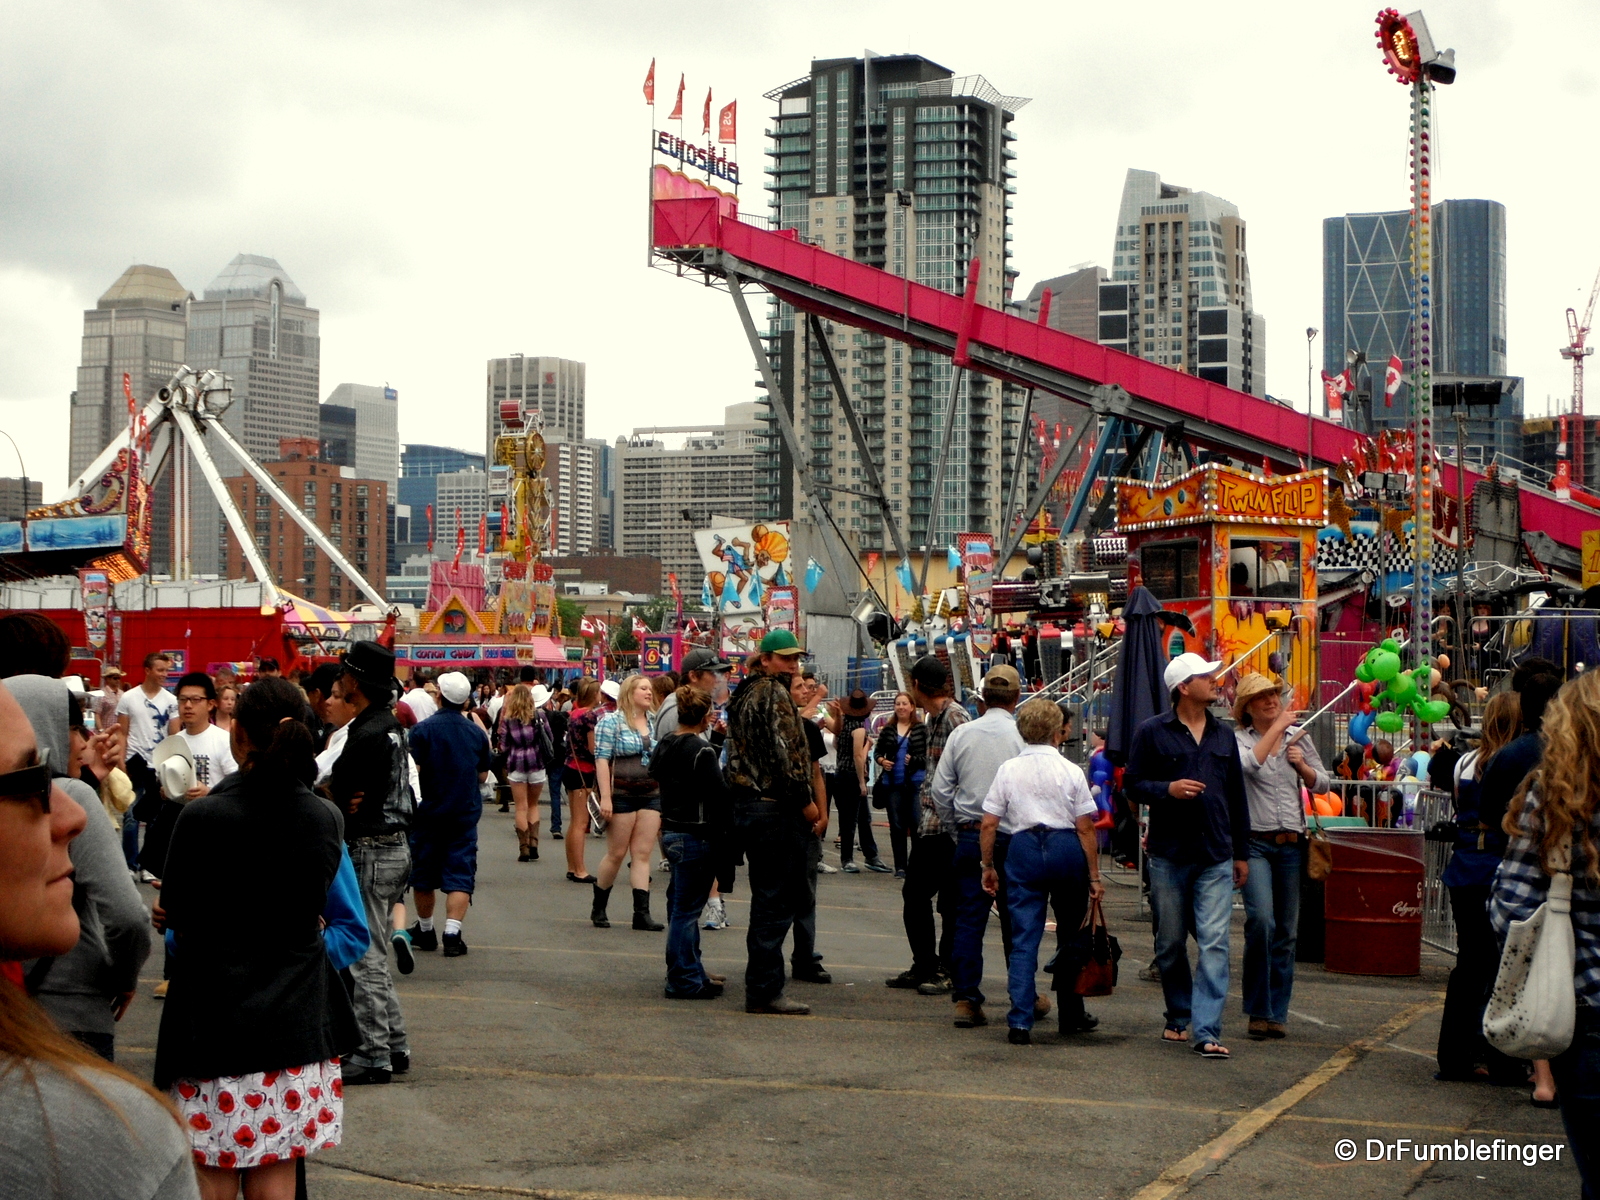 Midway, Calgary Stampede